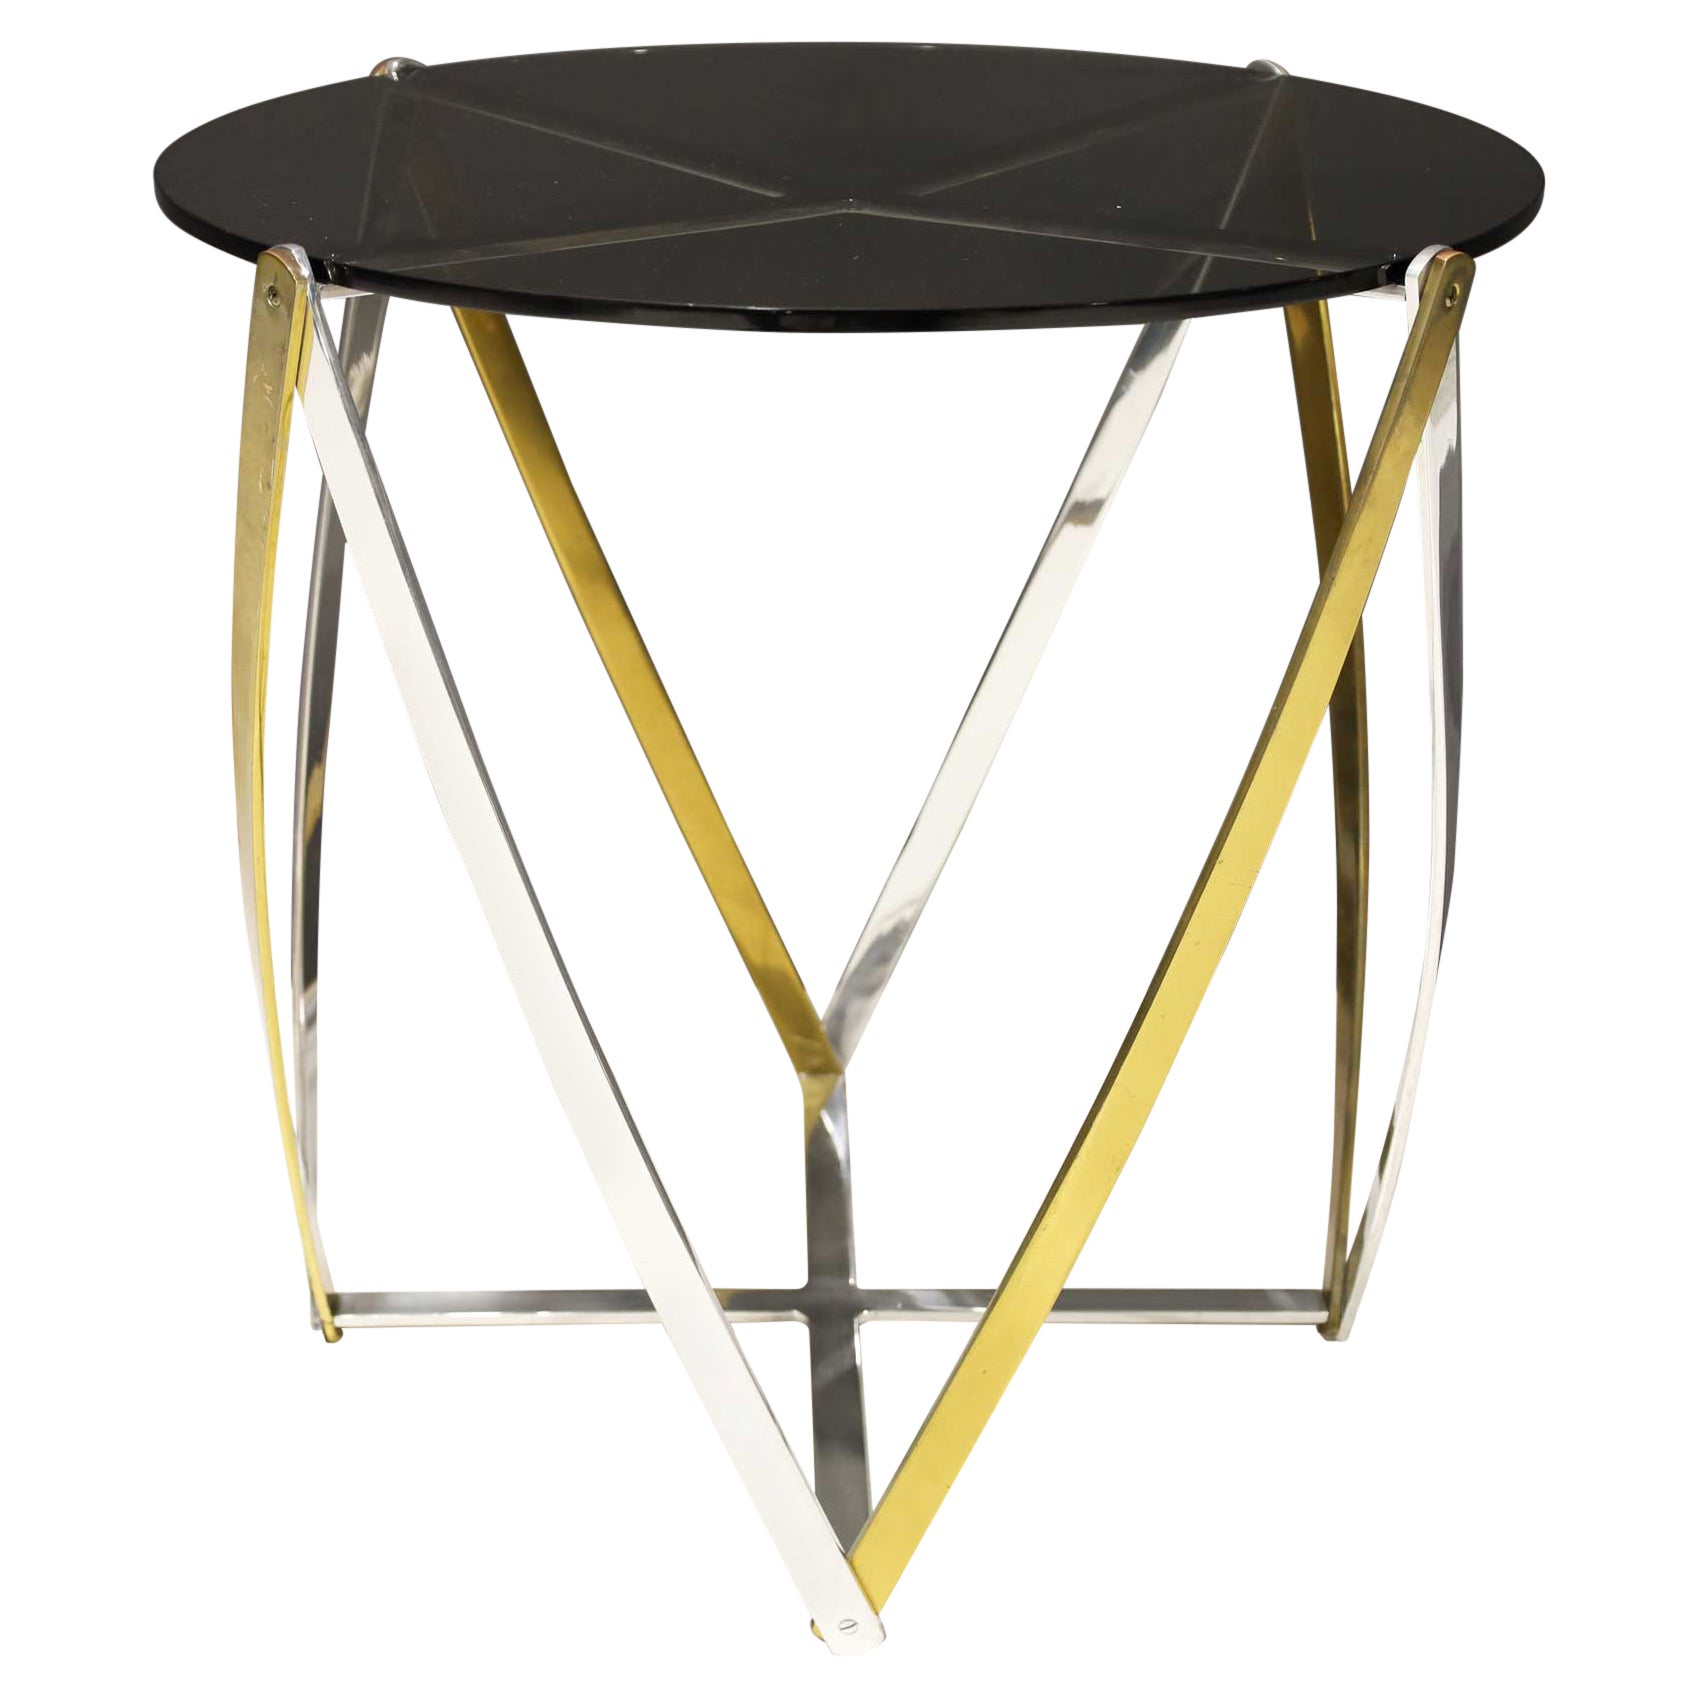 John Vesey Brass and Brushed Aluminum End Table 1970s, Smoked Glass Top